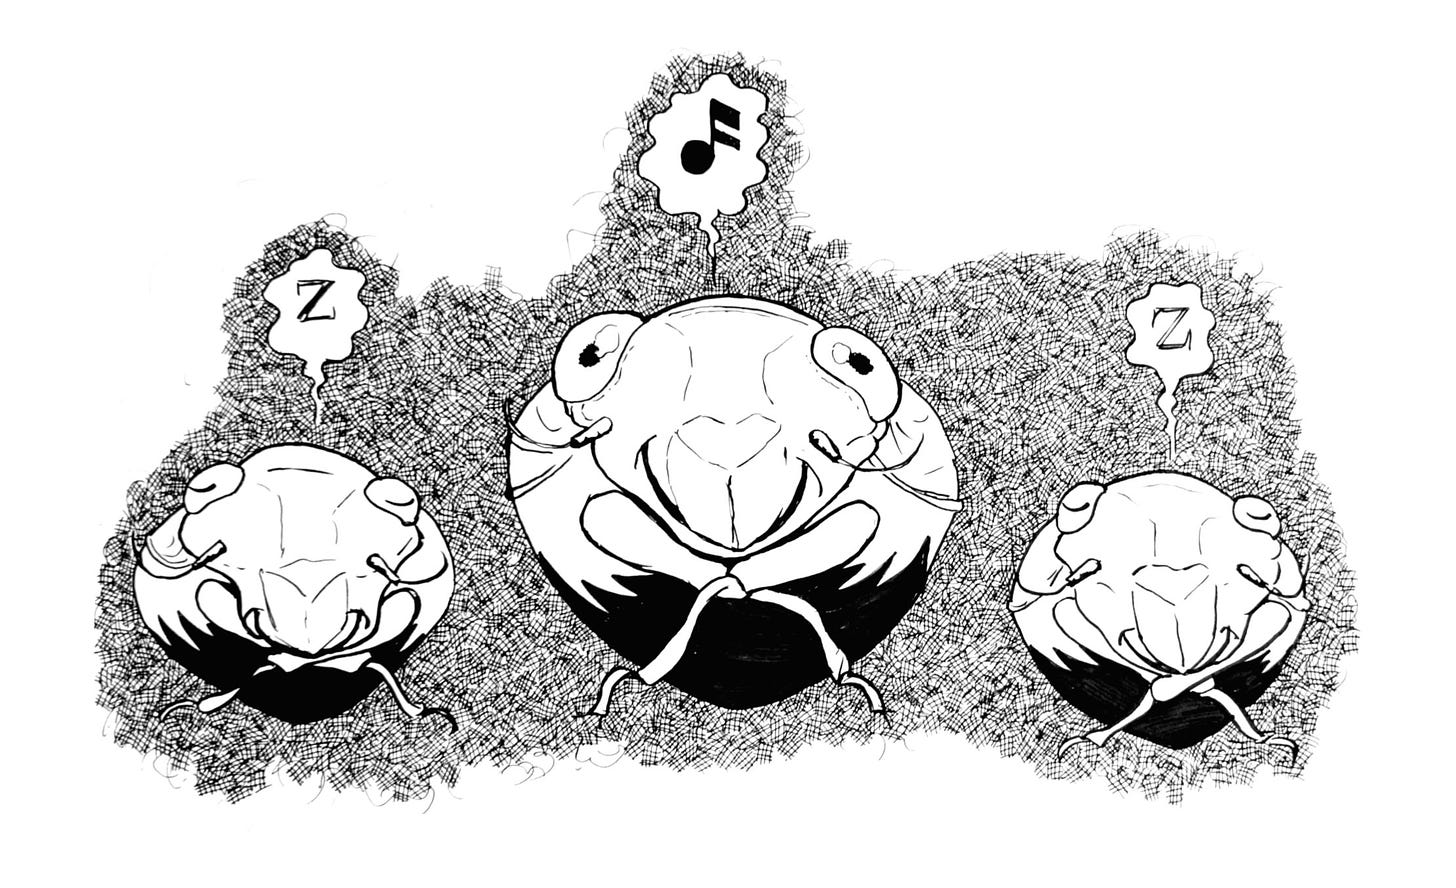 ink drawing of three cicadas, facing forward, underground. Two have their eyes closed a and Zed above their heads indicating sleep. The middle is awake with a musical note above their head.